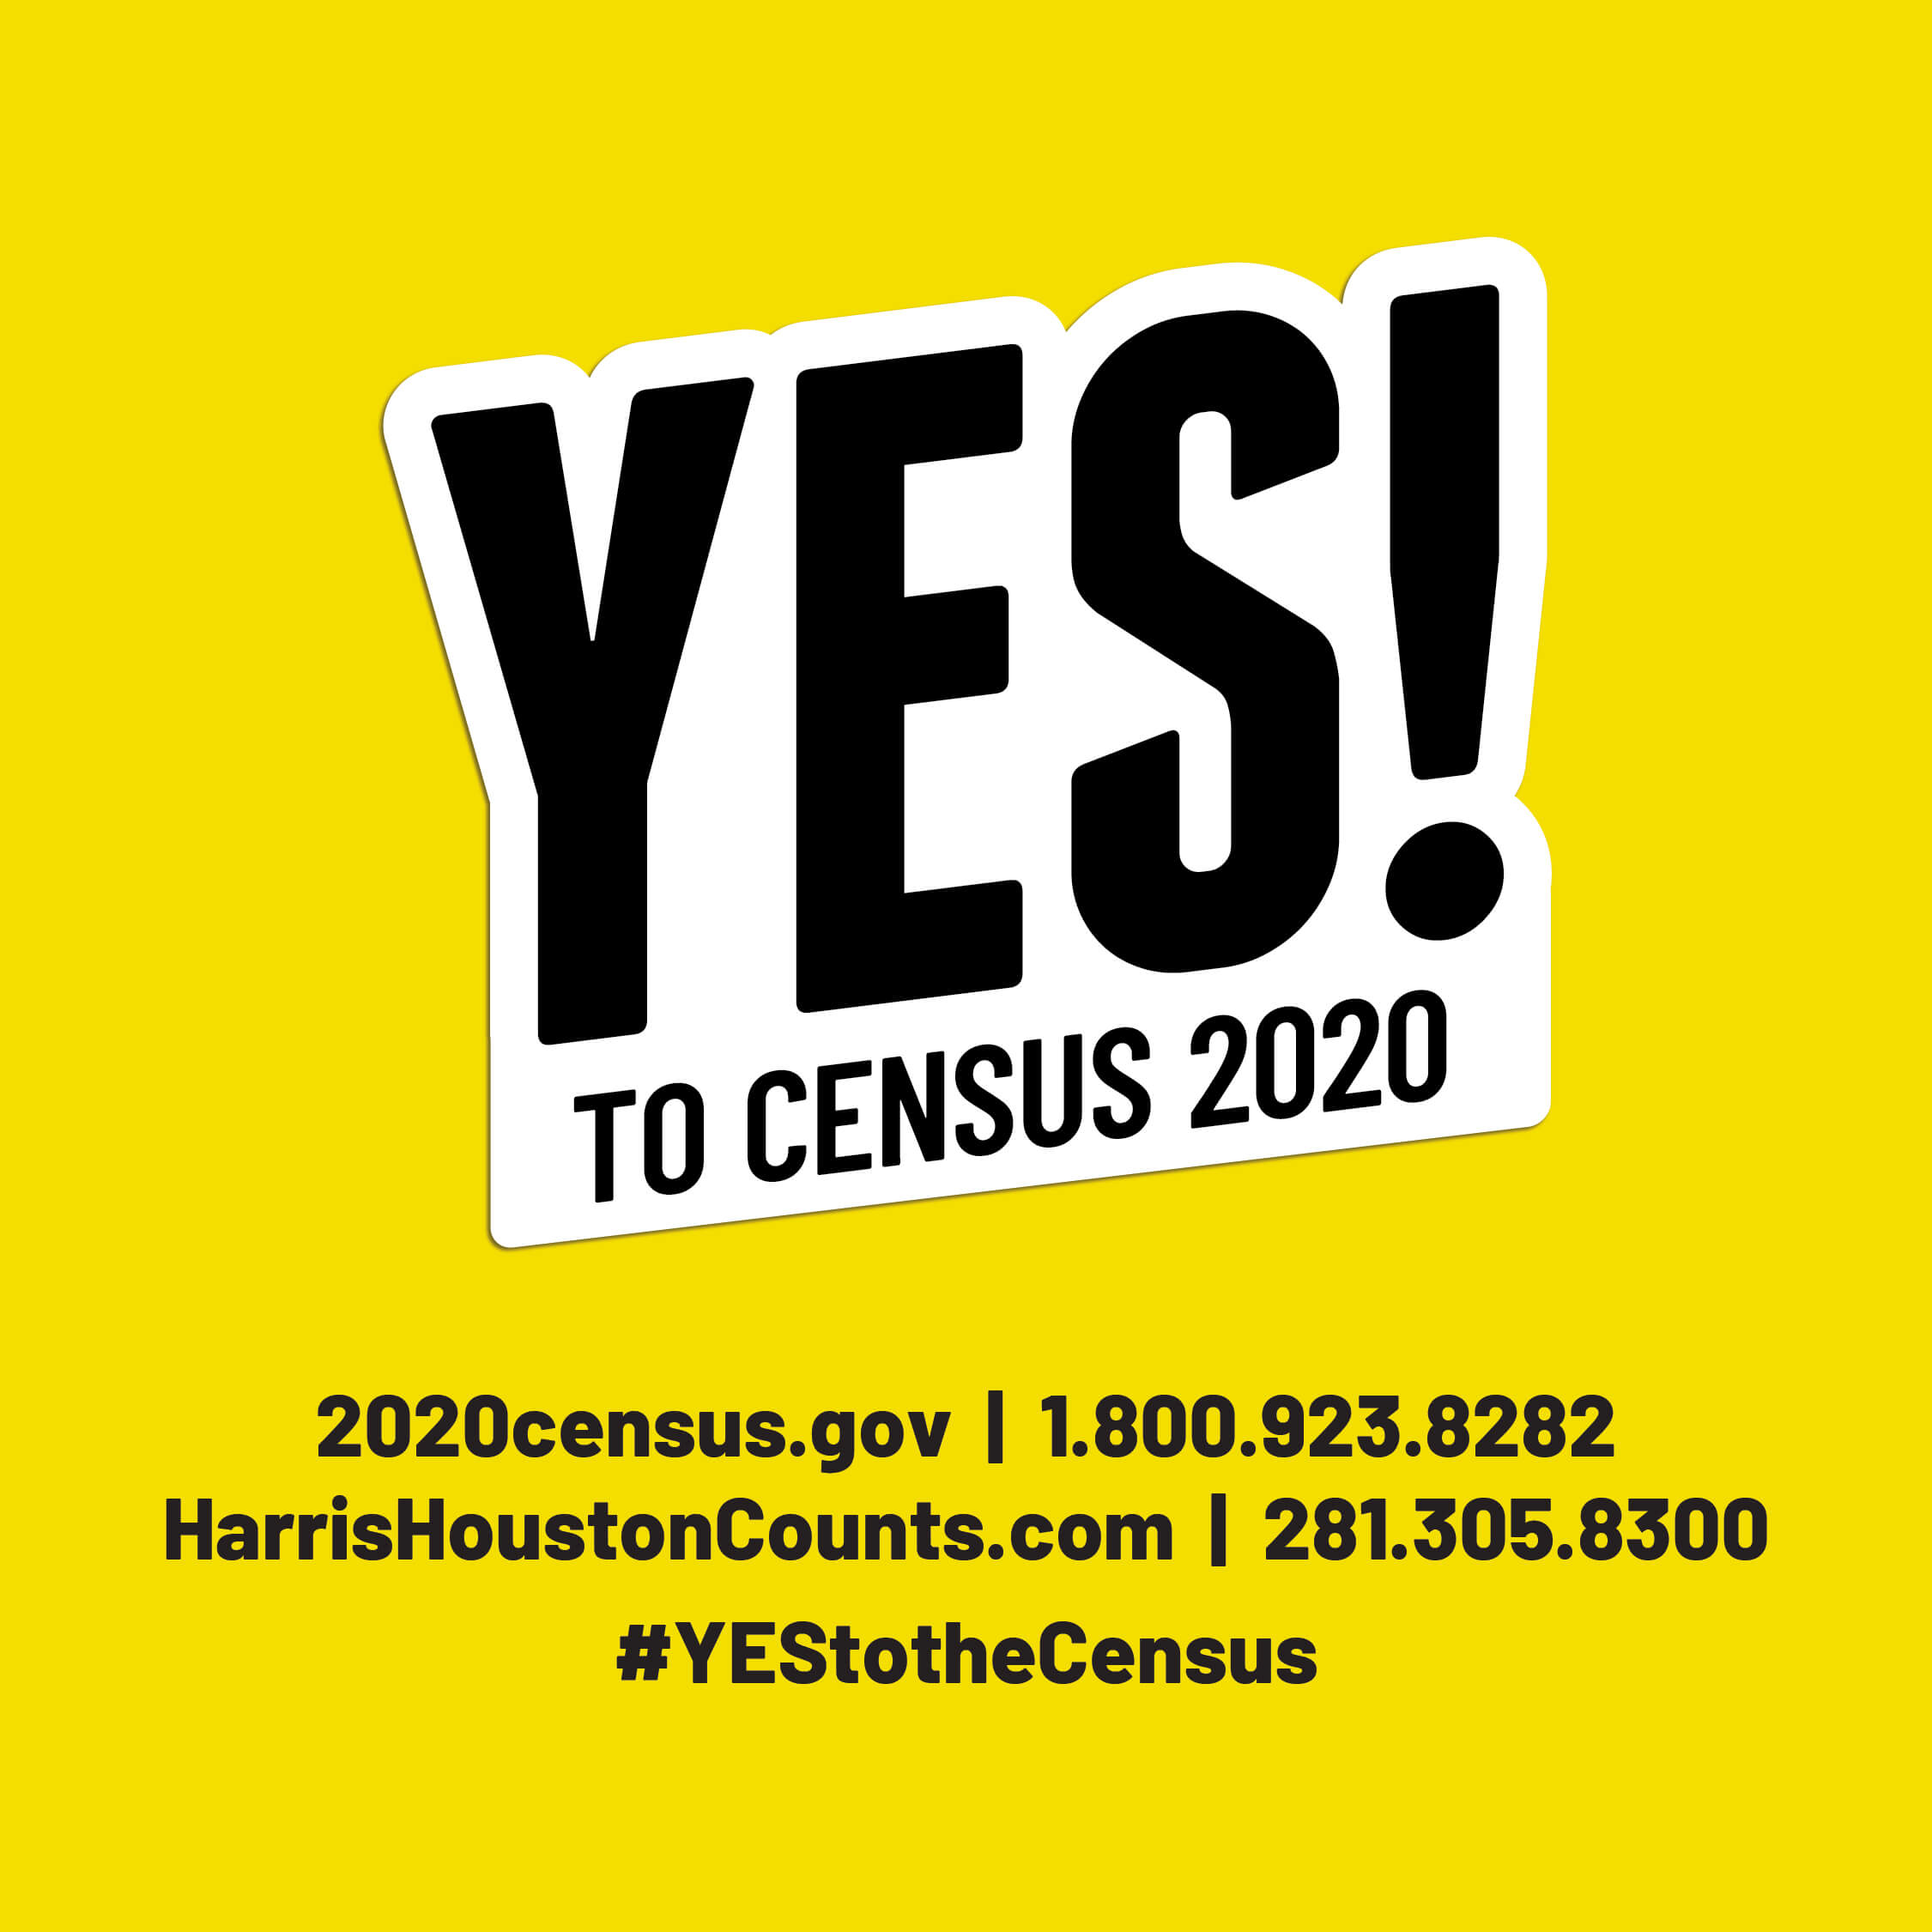 Say YES to the 2020 Census!